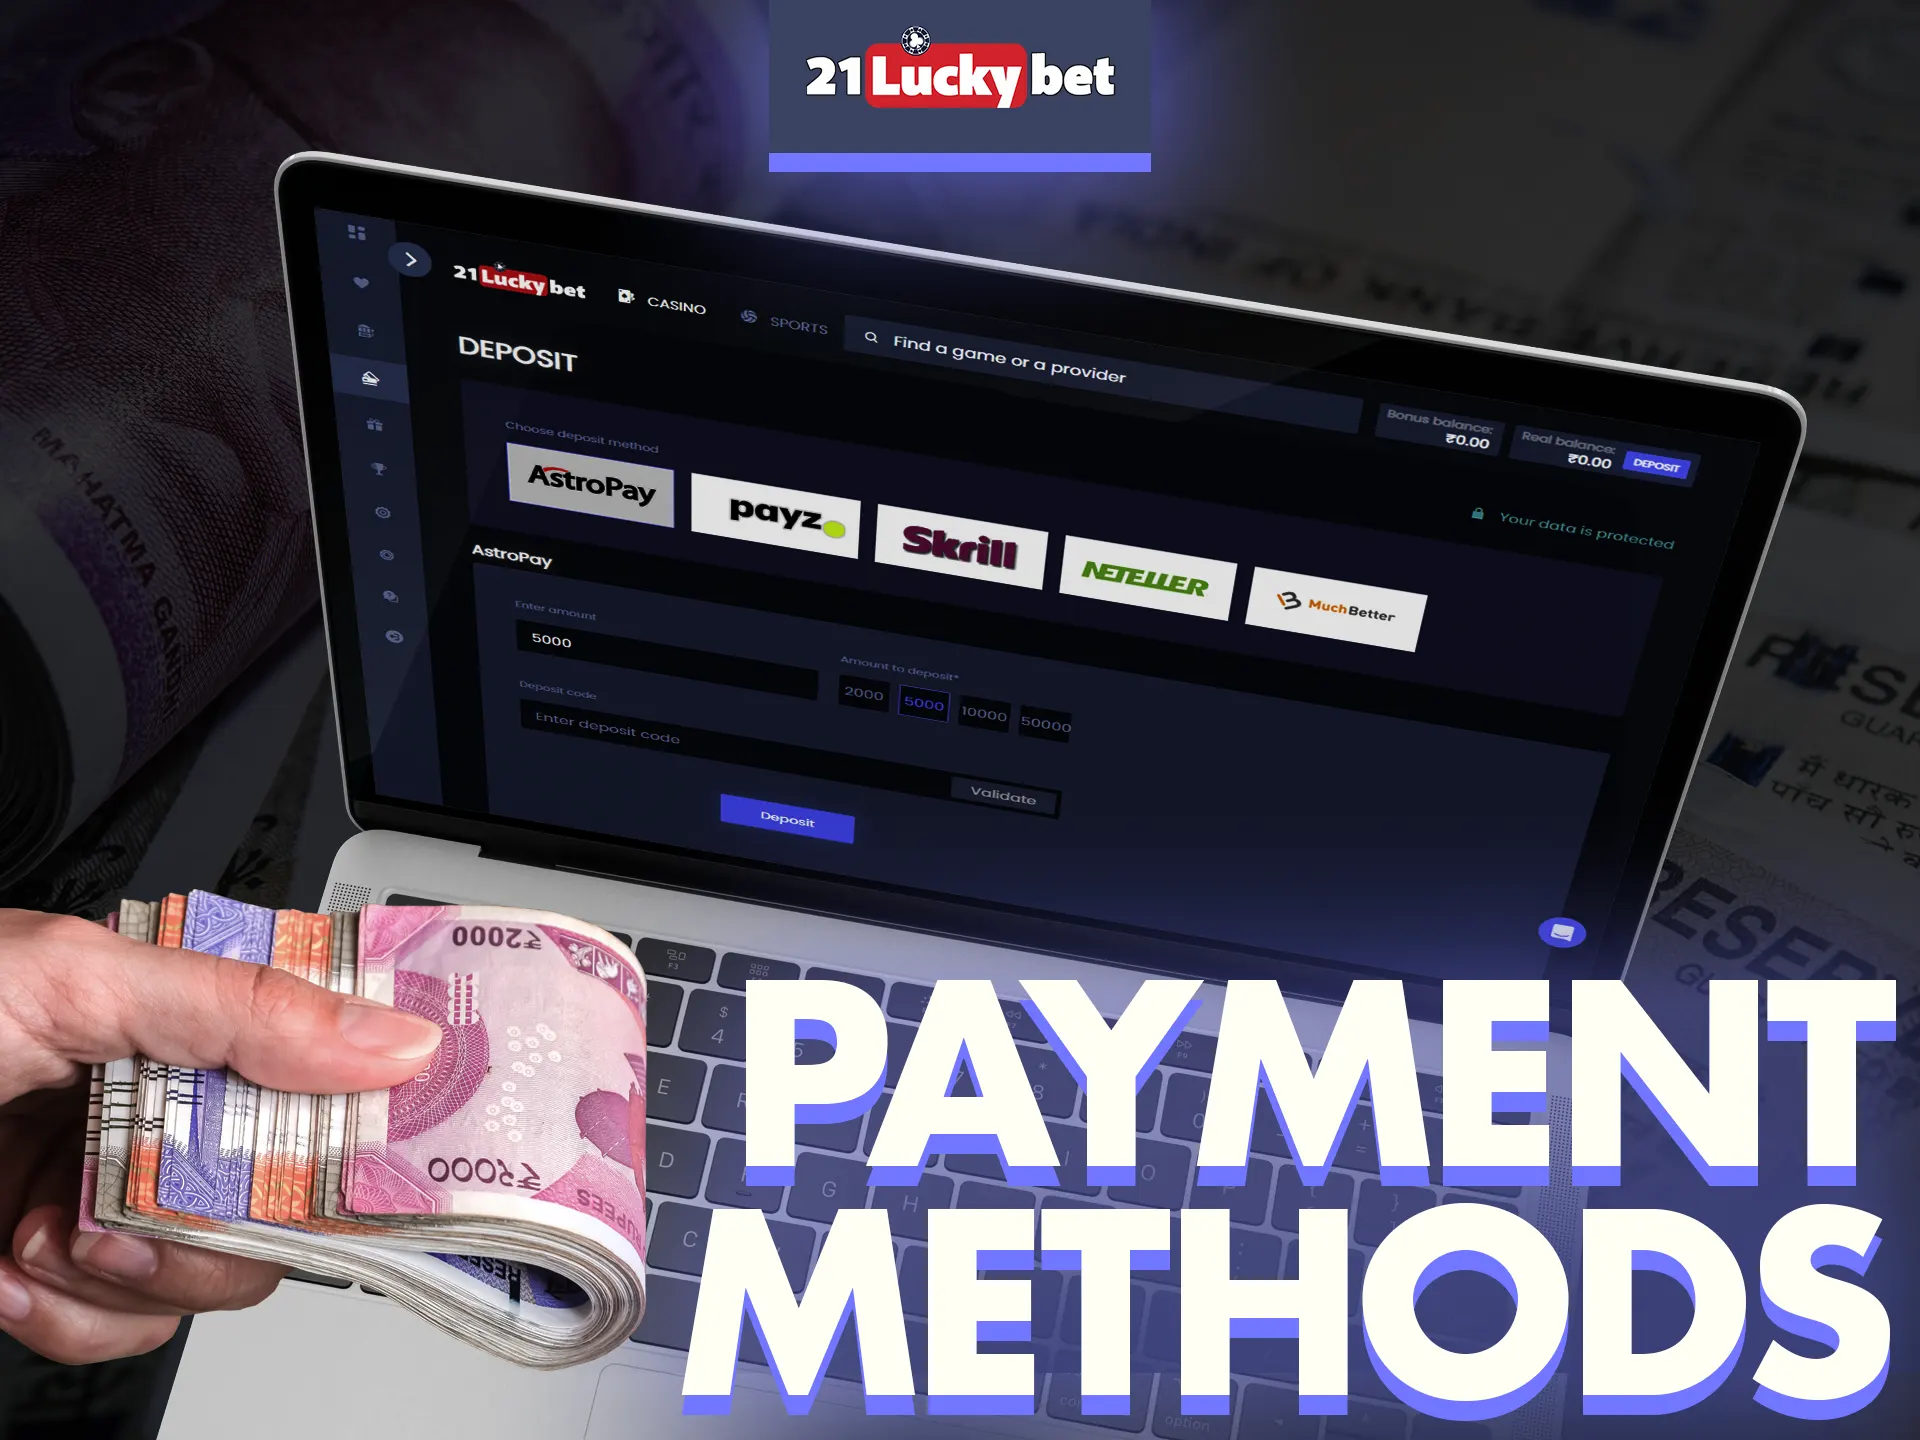 Try 21luckybet payment methods for Indians.